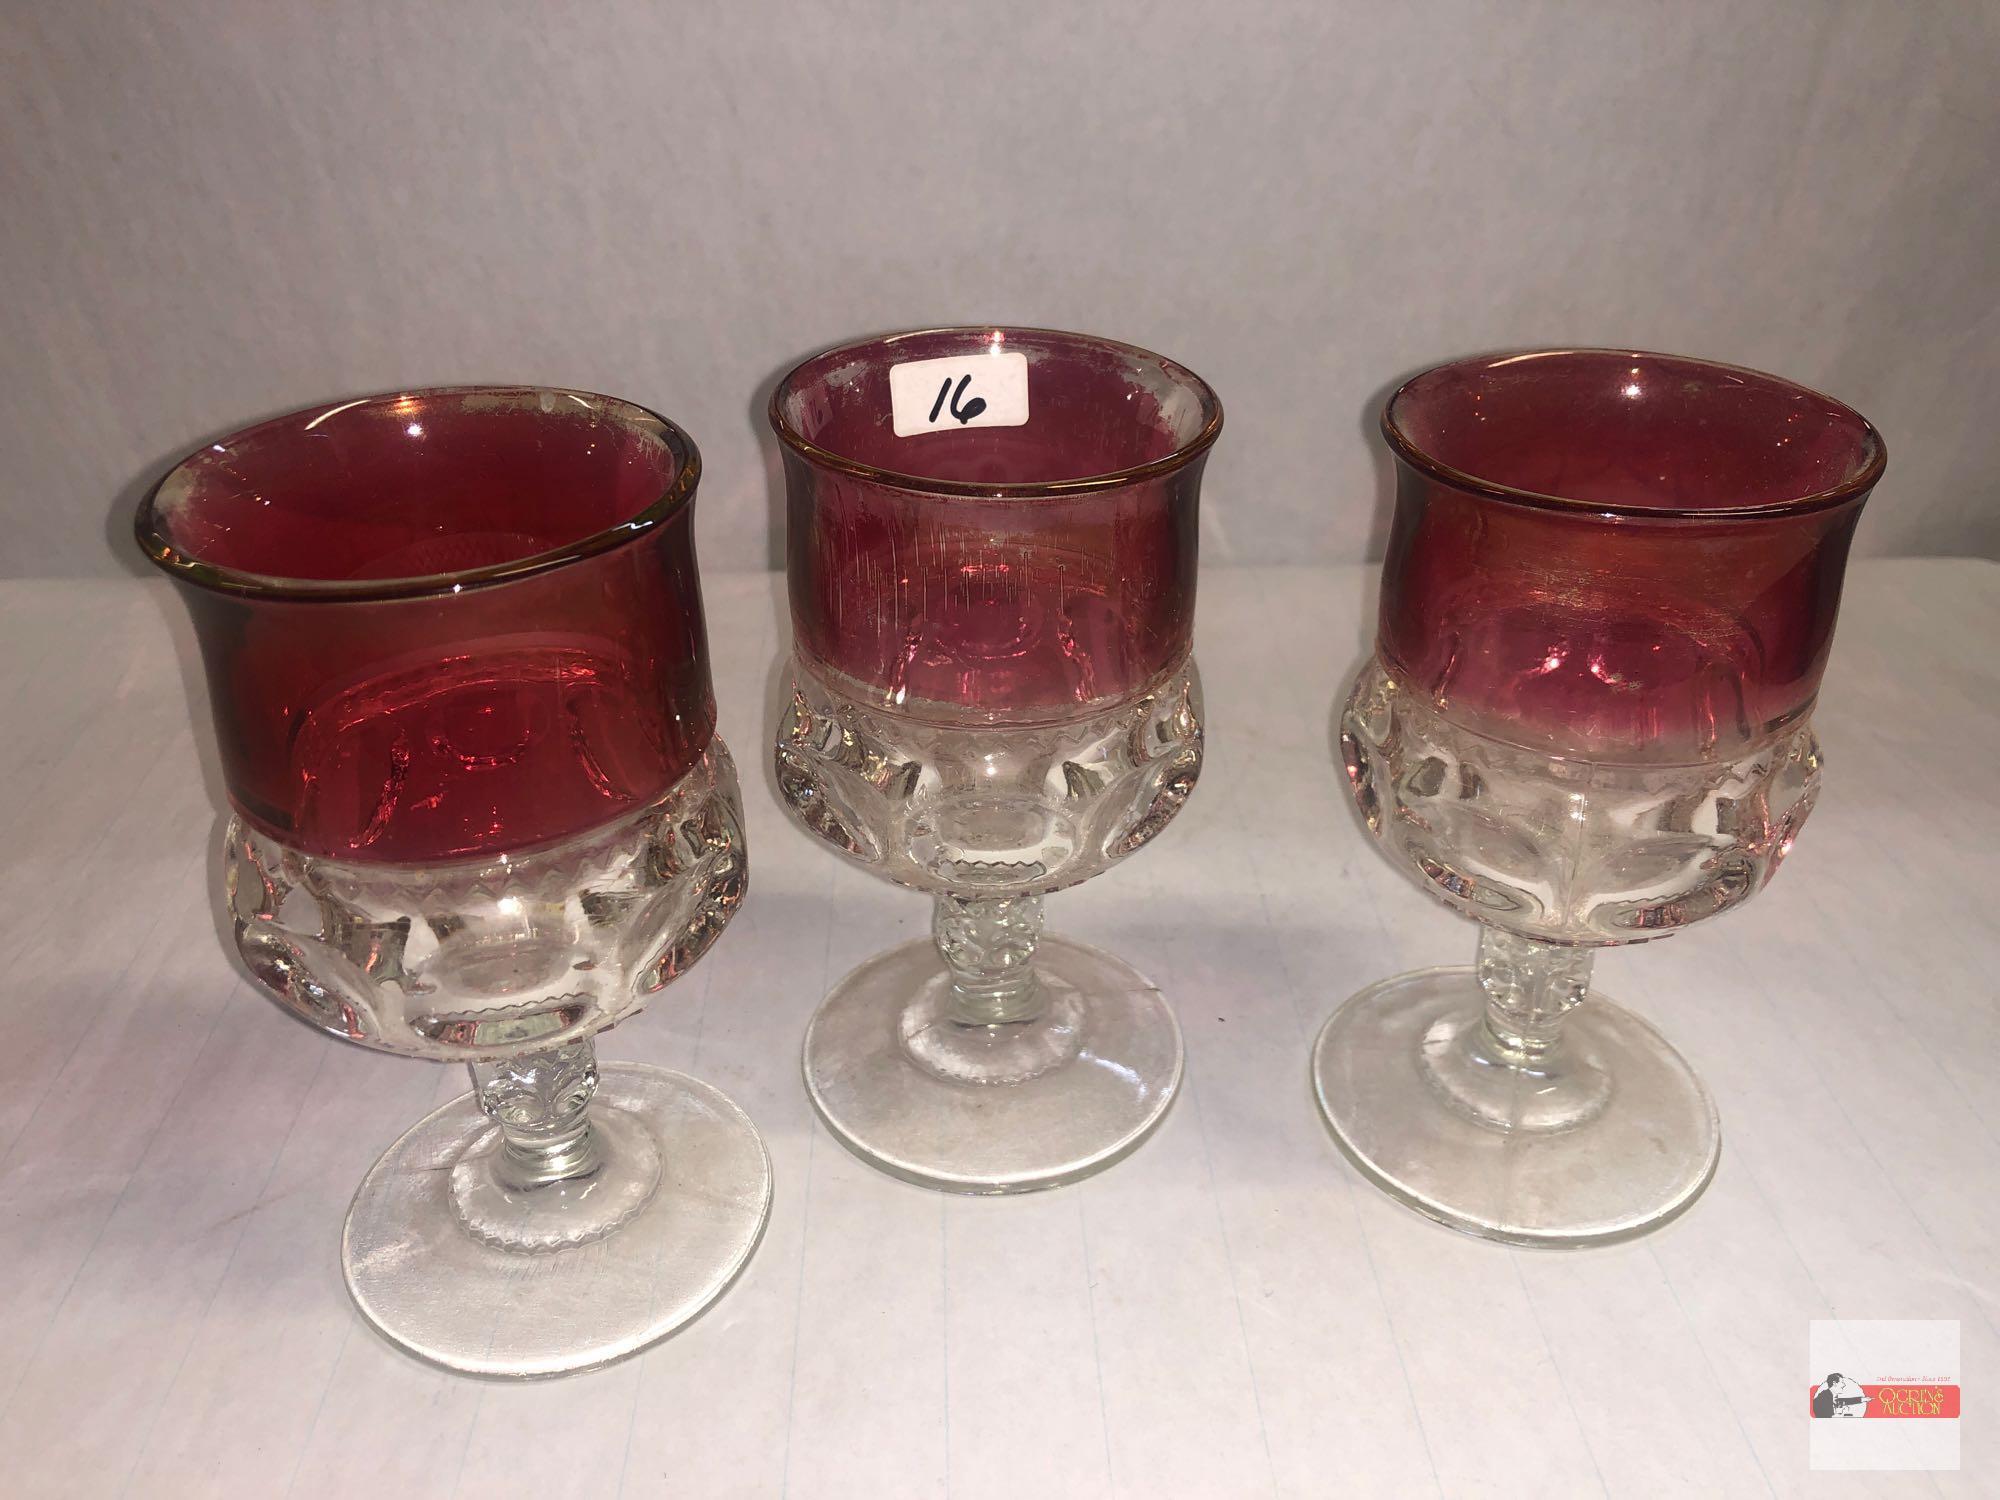 Dish ware - 10 items - 3 Hall oval dishes 9.25"wx5"w, 3 Fiesta cups 2.75"h, 3 Ruby flash goblets 5.5